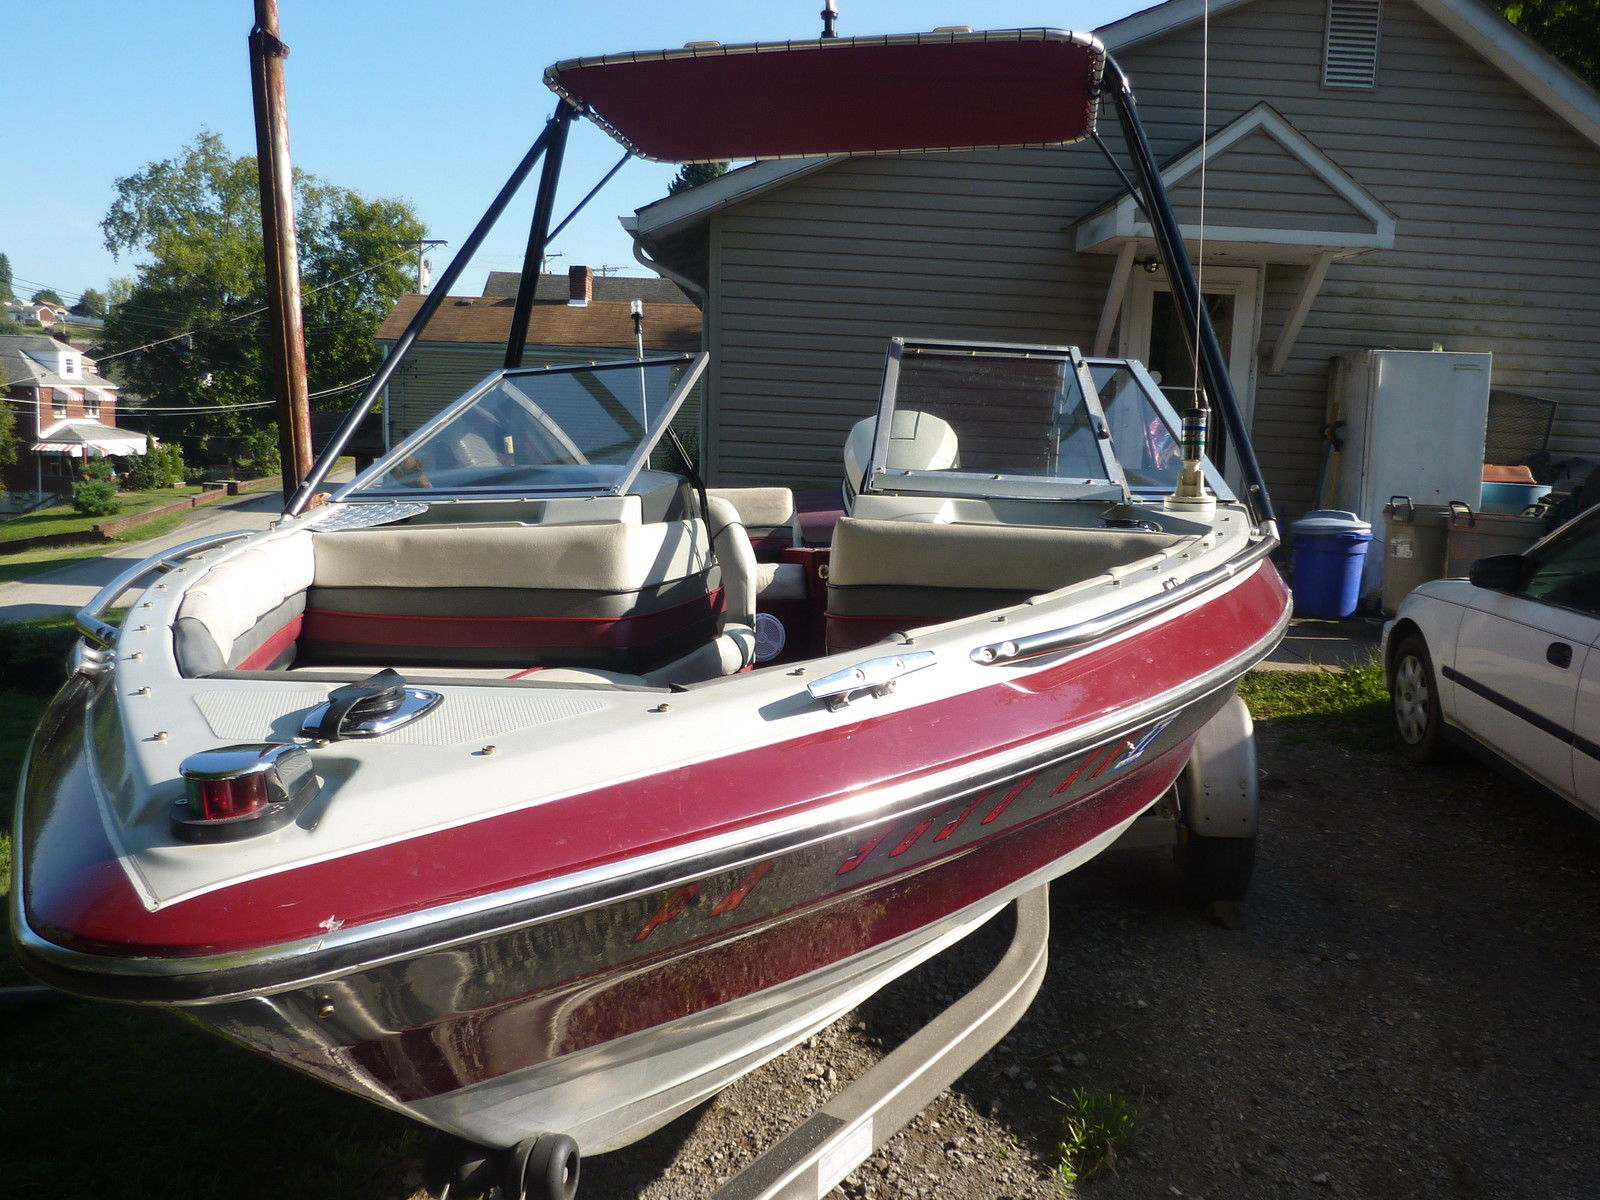 Maxum 1700 1988 for sale for $4,150 - Boats-from-USA.com